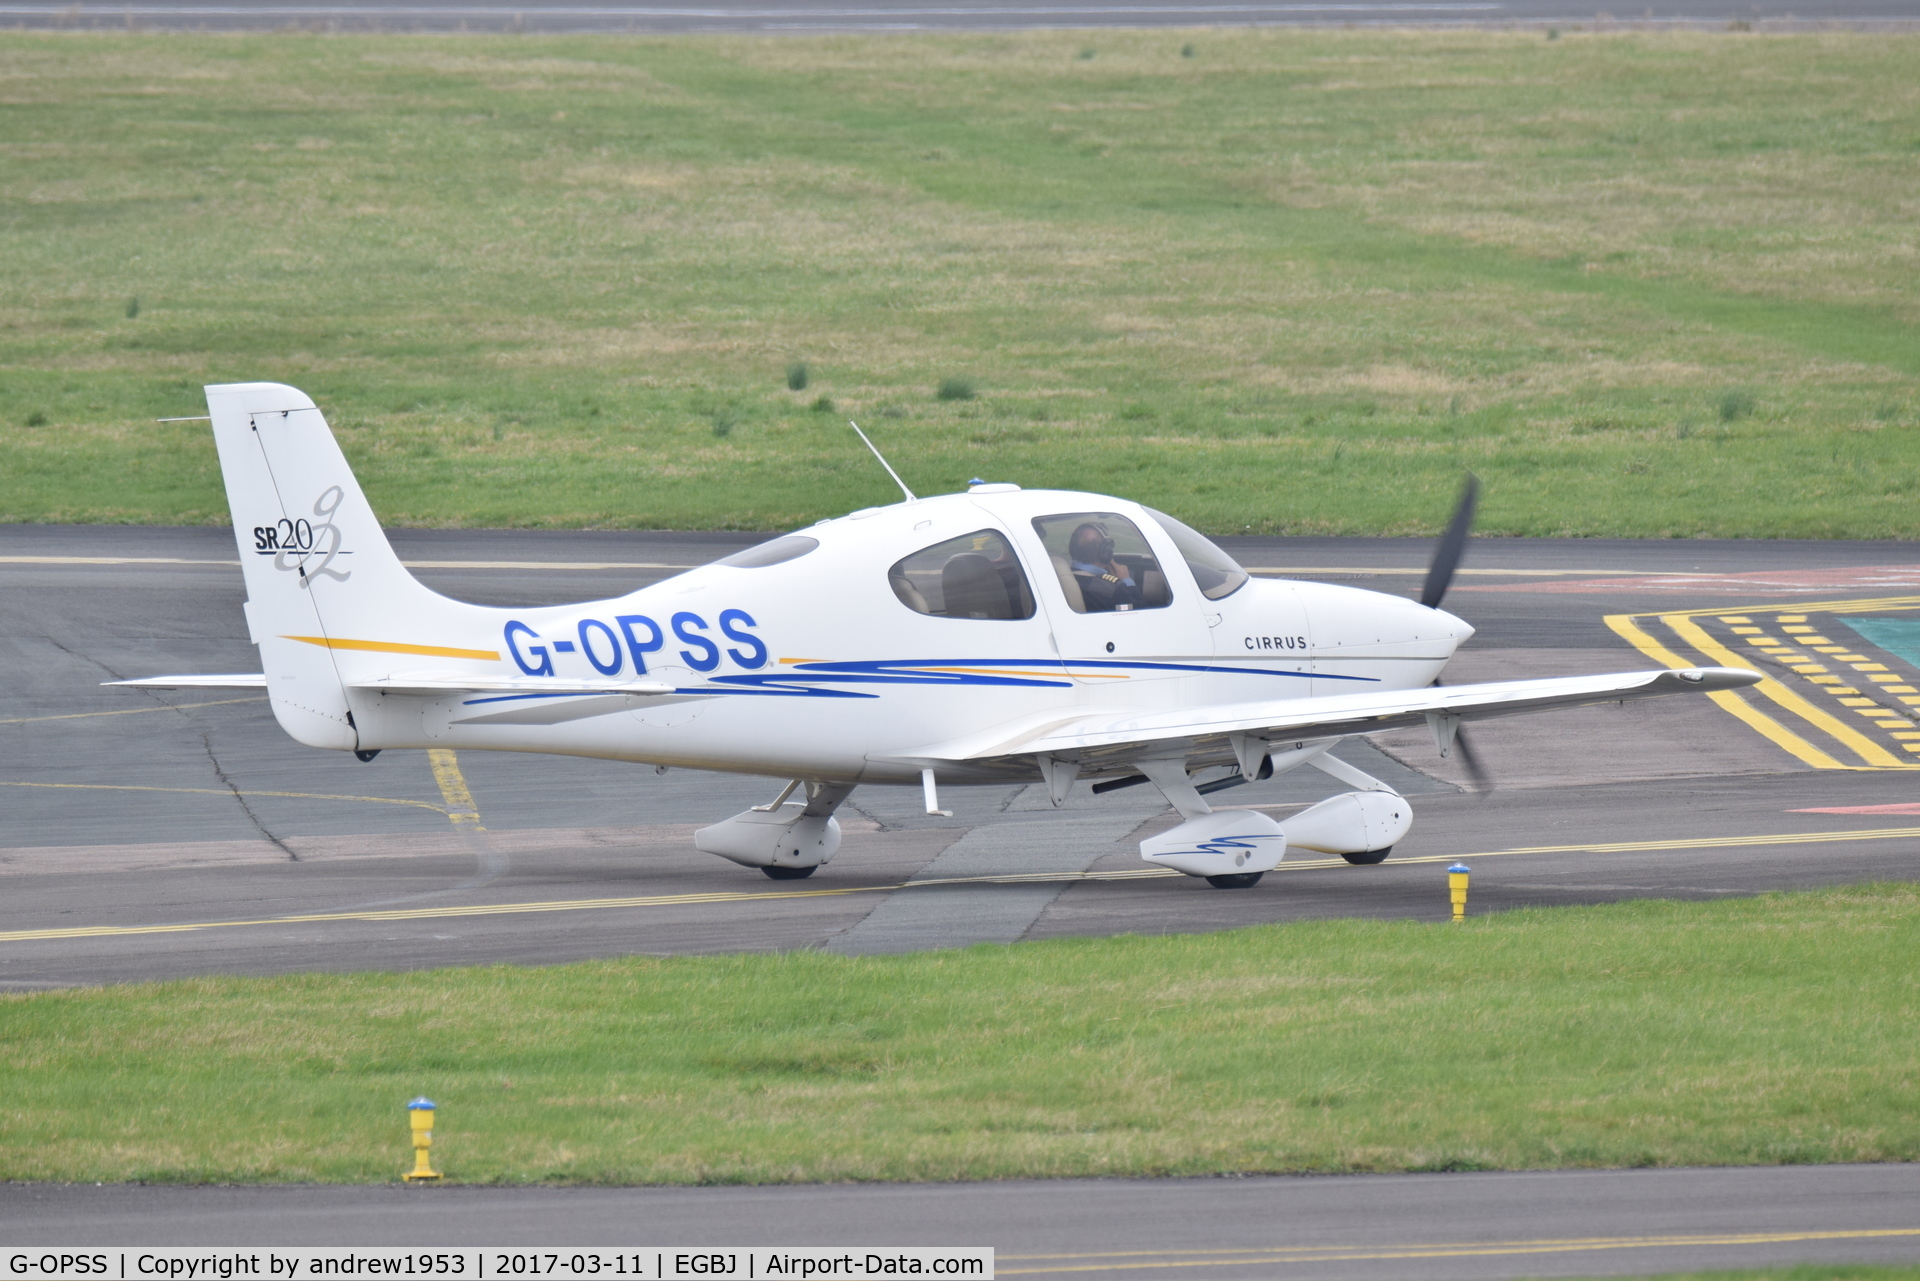 G-OPSS, 2004 Cirrus SR20 G2 C/N 1458, G-OPSS at Gloucestershire Airport.